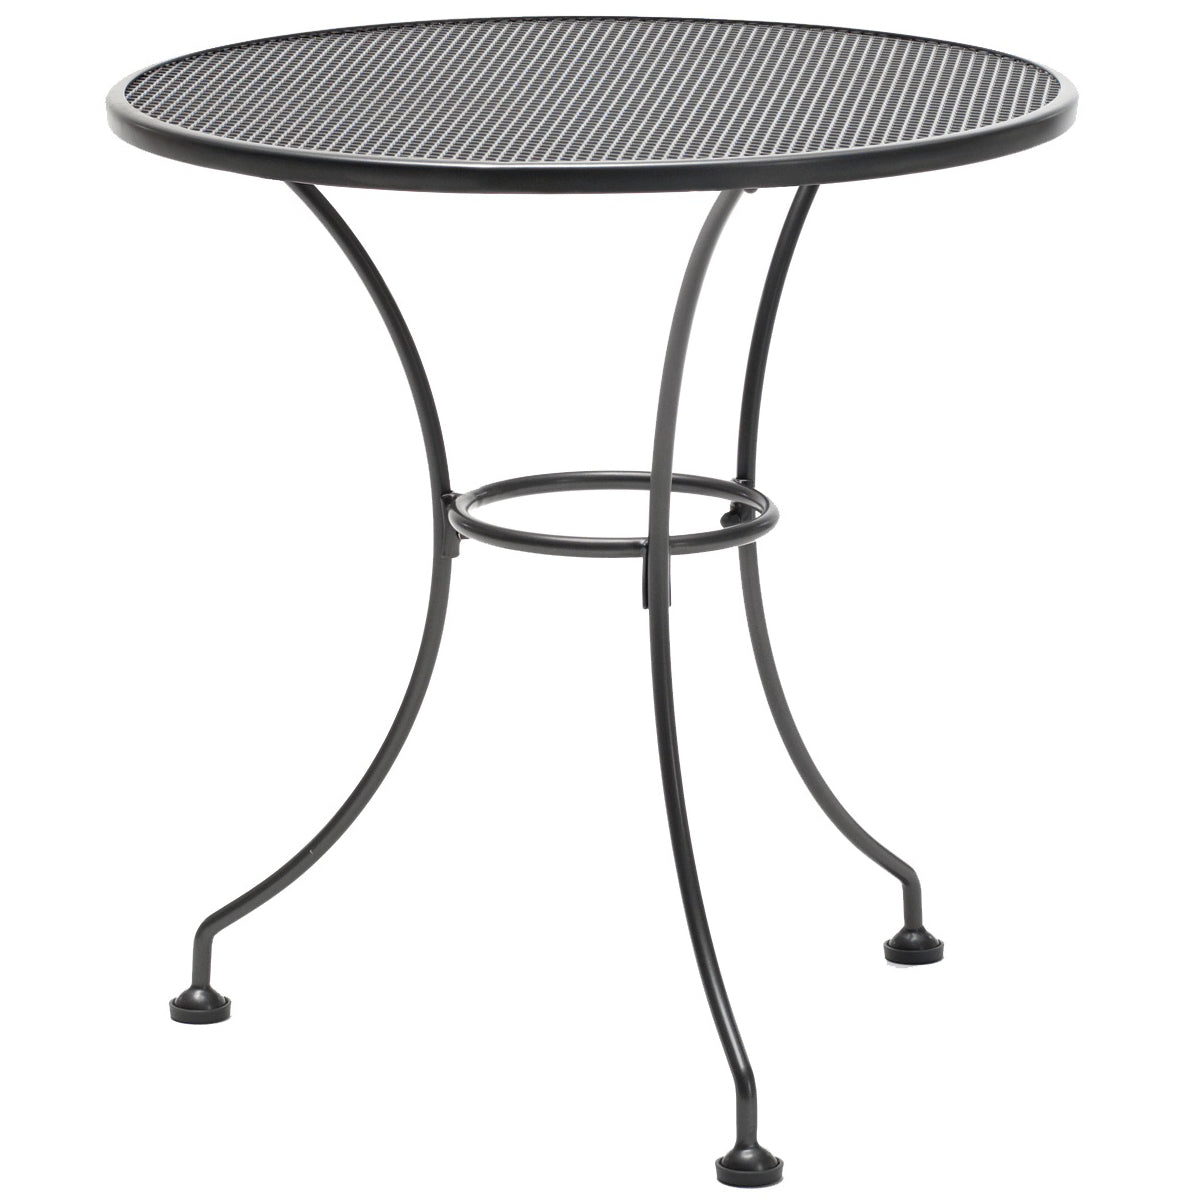 24" Round Mesh Top Table